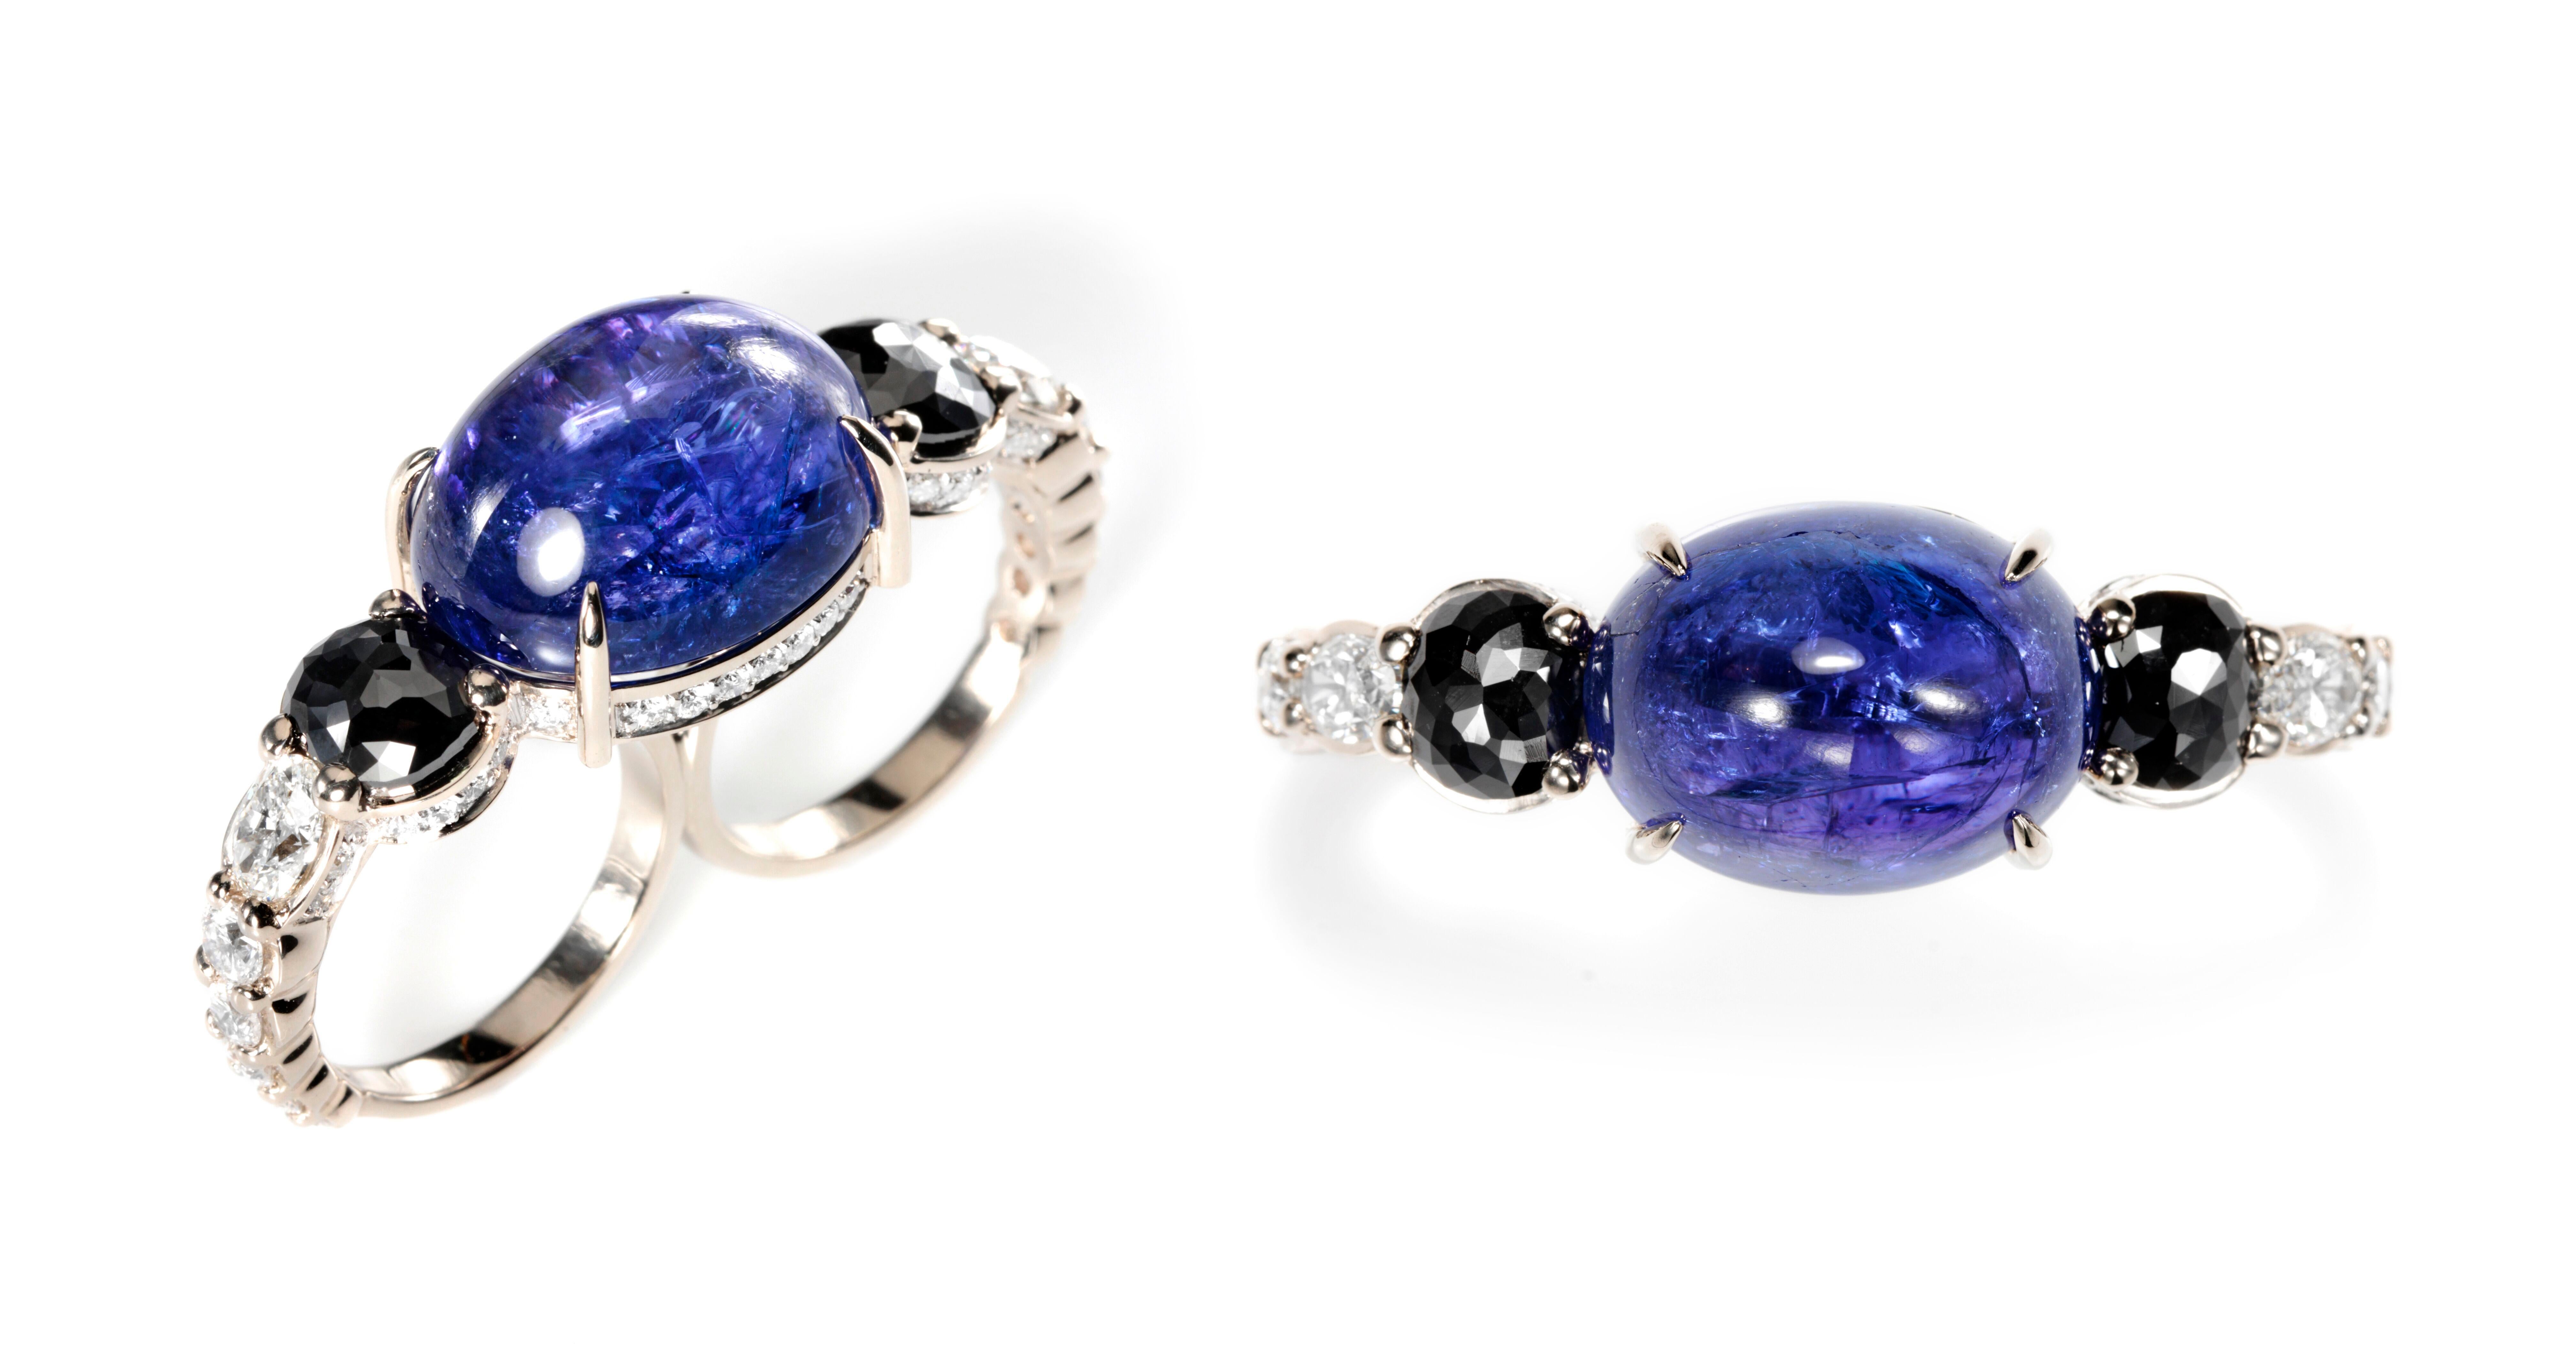 Designed exclusively by Ara Vartanian, this 18K White Gold two finger ring features one Tanzanite, in a oval cabochon cut, weighing 30,3ct (thirty carats and three points), along with a pair of Black Diamonds in a antique rose-cut, with a total